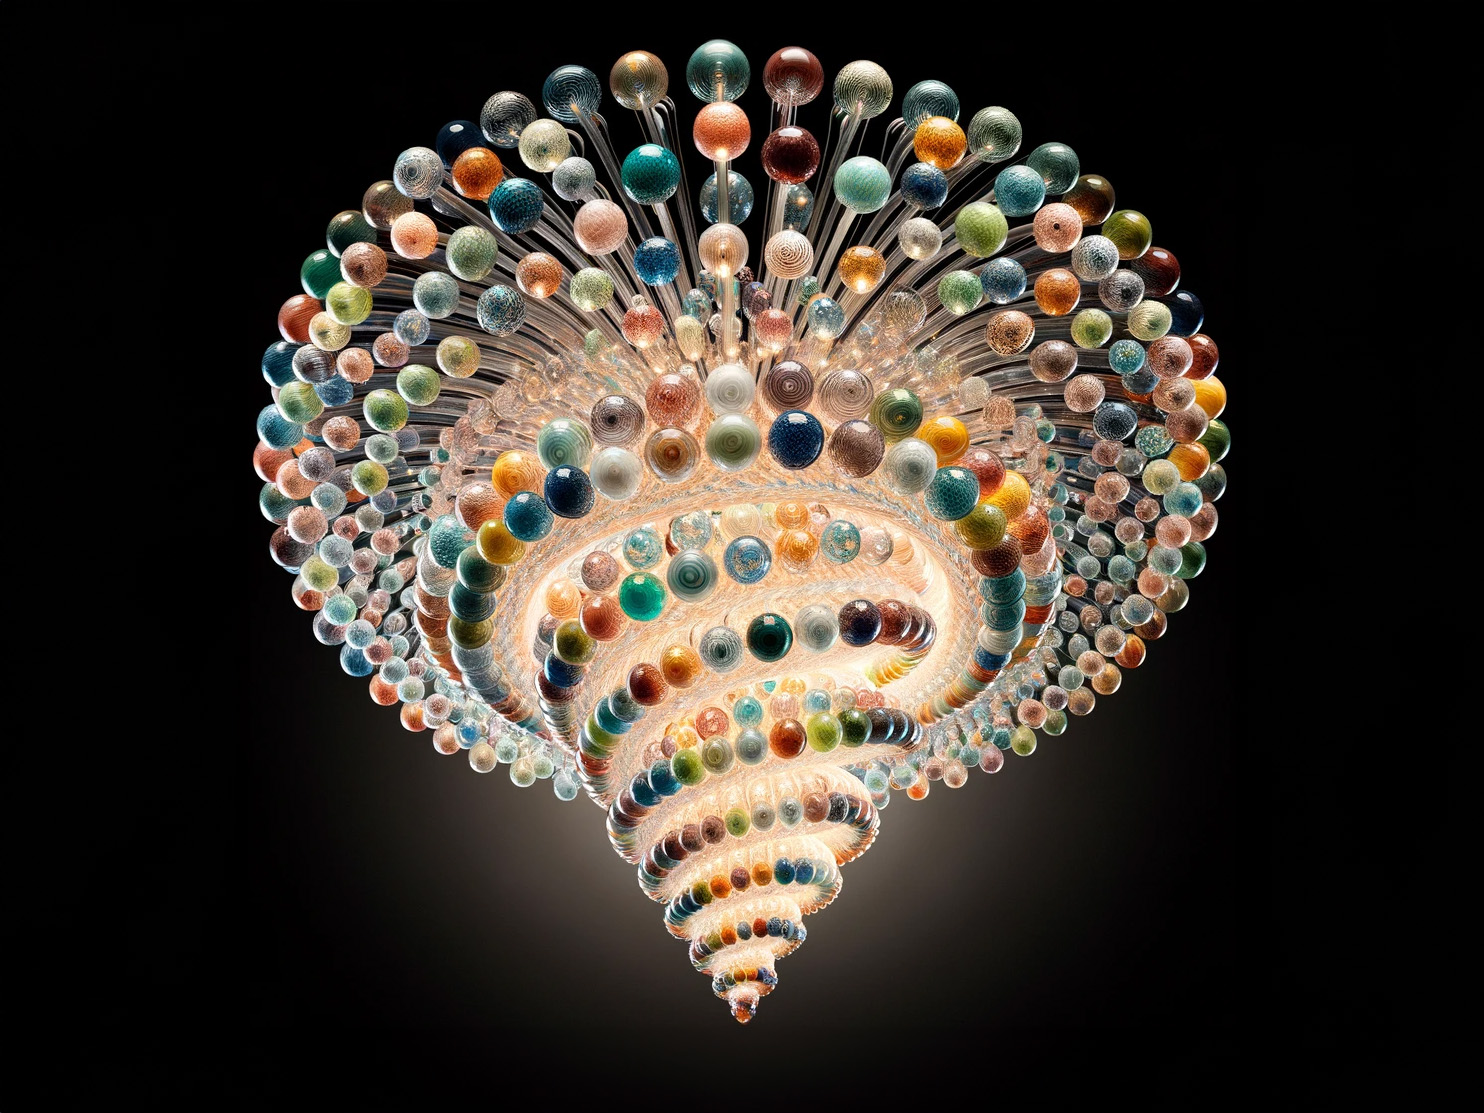 Custom Murano Chandeliers - How to Request Personalization